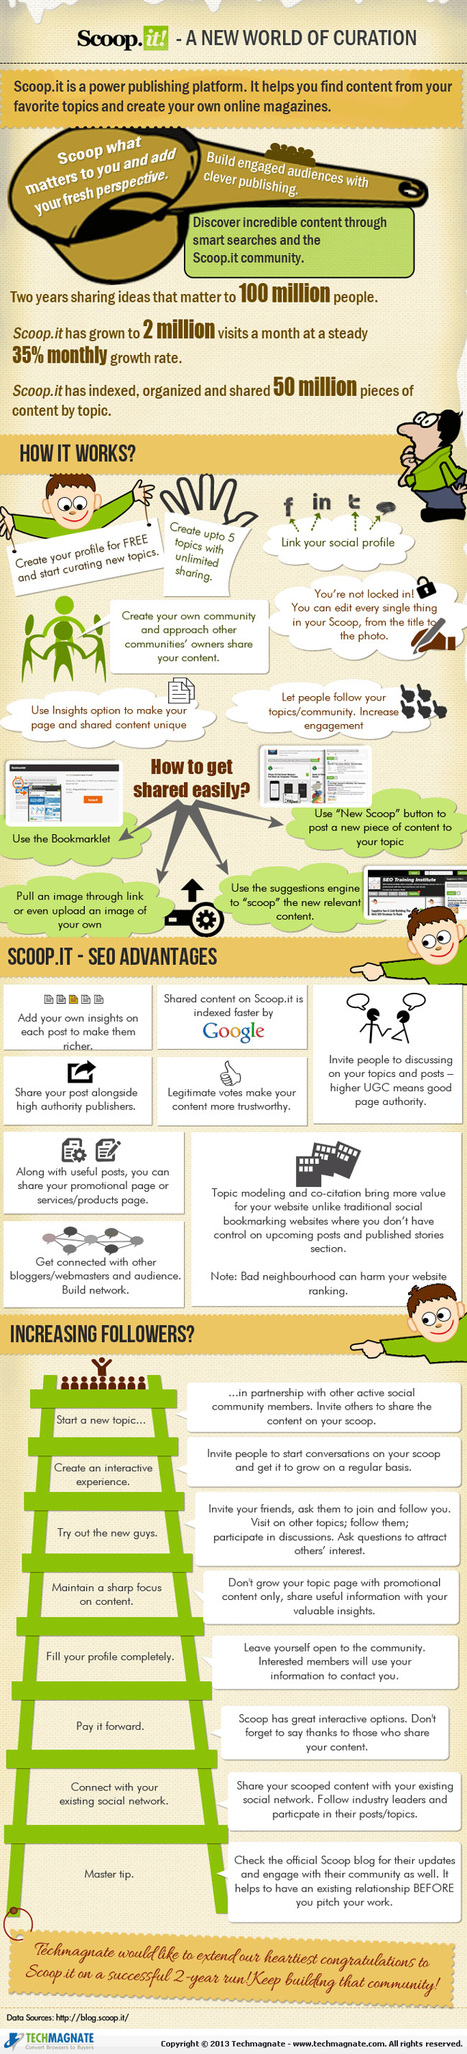 Scoop.It for SEO – A New World of Curation [Infographic] | Better know and better use Social Media today (facebook, twitter...) | Scoop.it